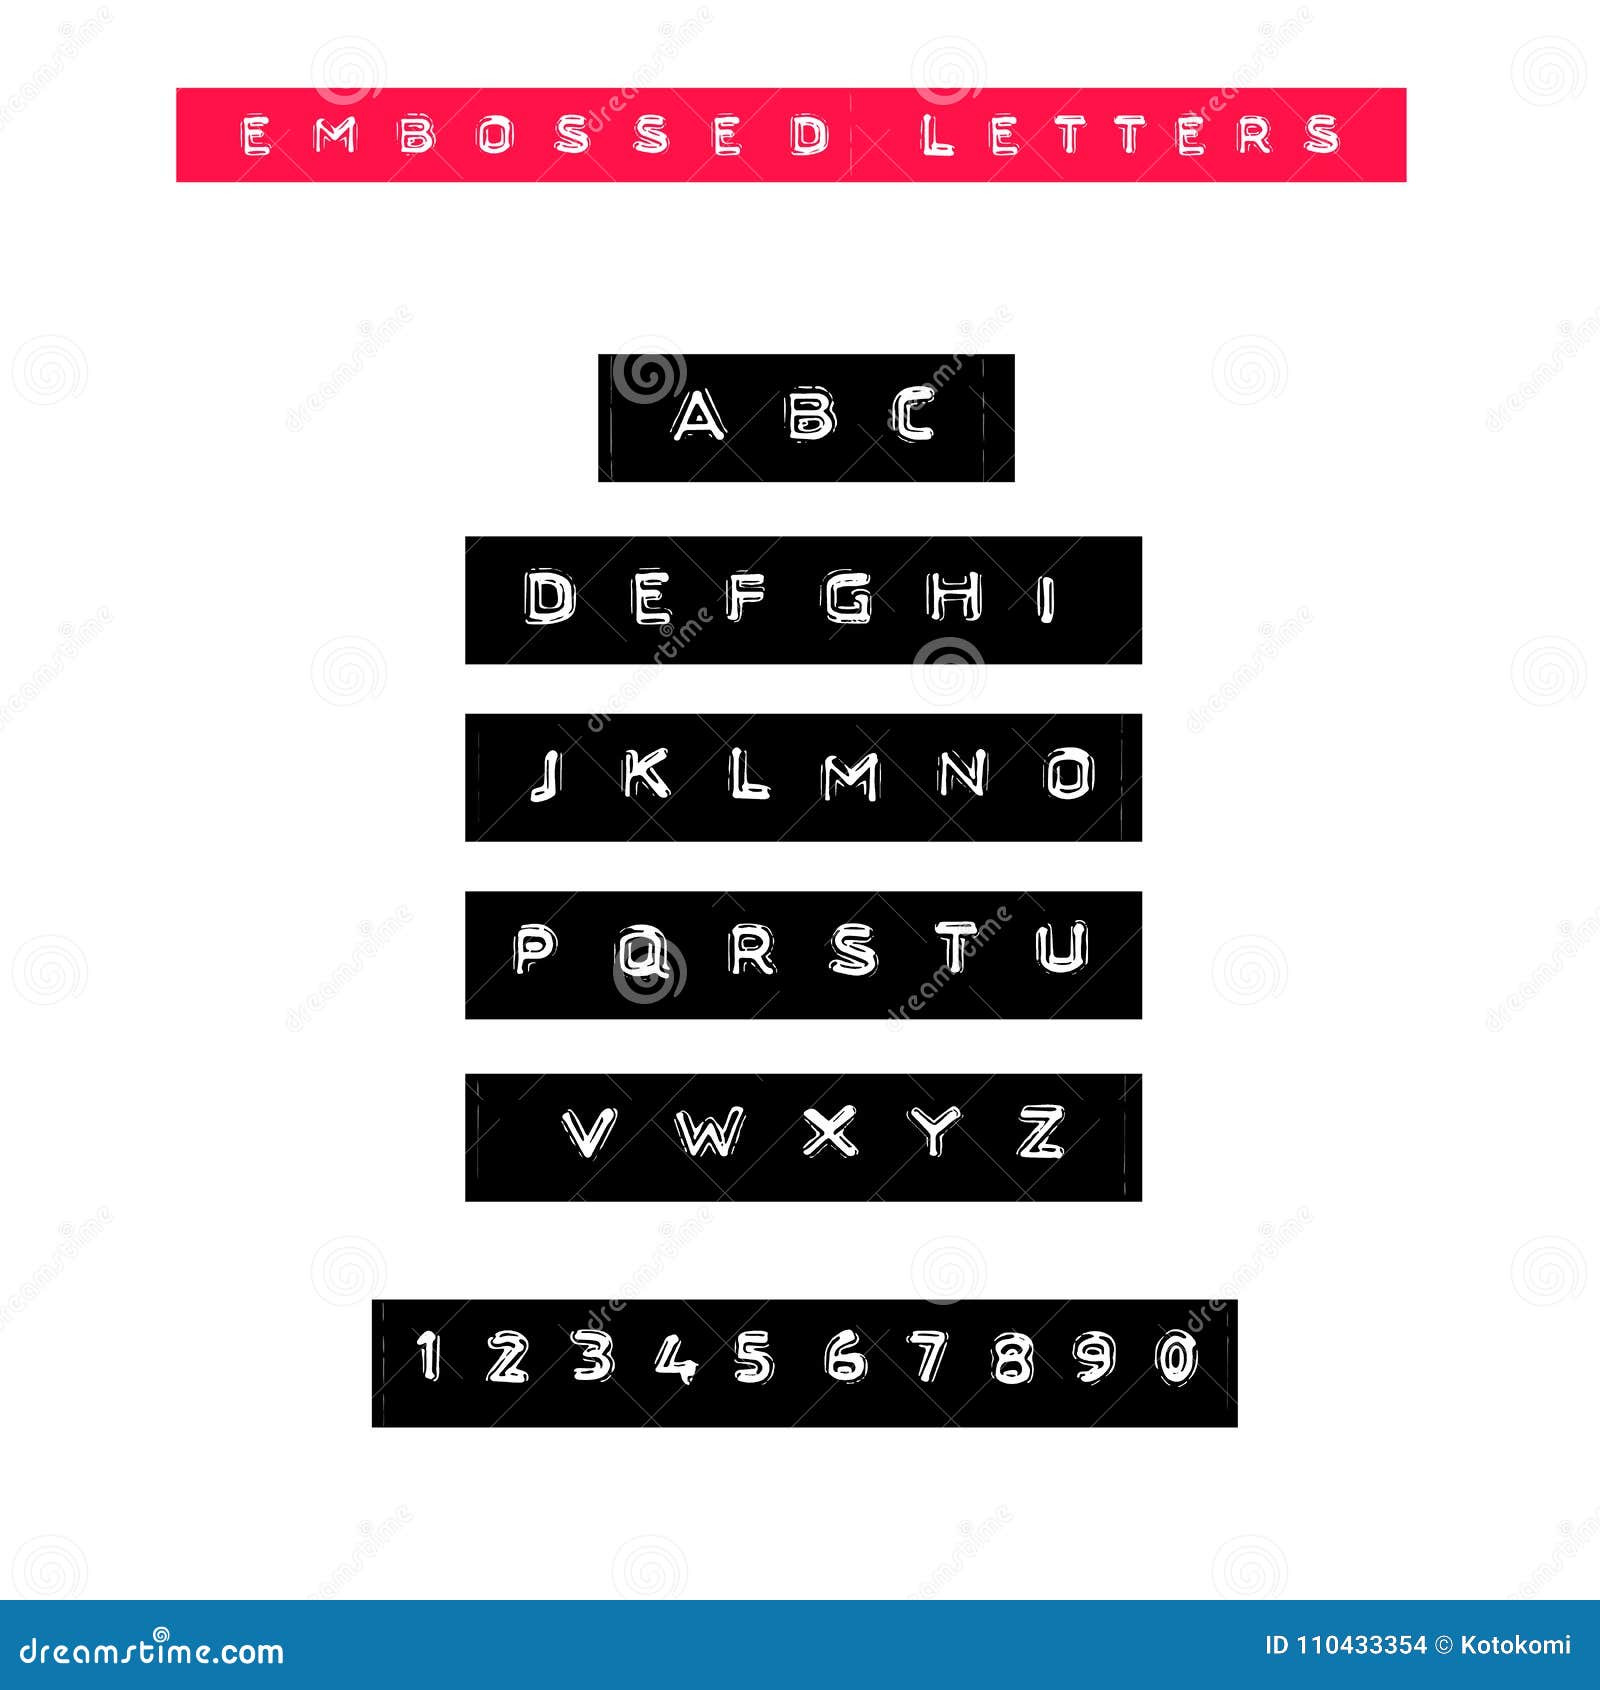 https://thumbs.dreamstime.com/z/embossed-letters-tape-font-vintage-adhesive-label-type-vector-alphabet-embossed-letters-tape-font-vintage-adhesive-label-type-110433354.jpg